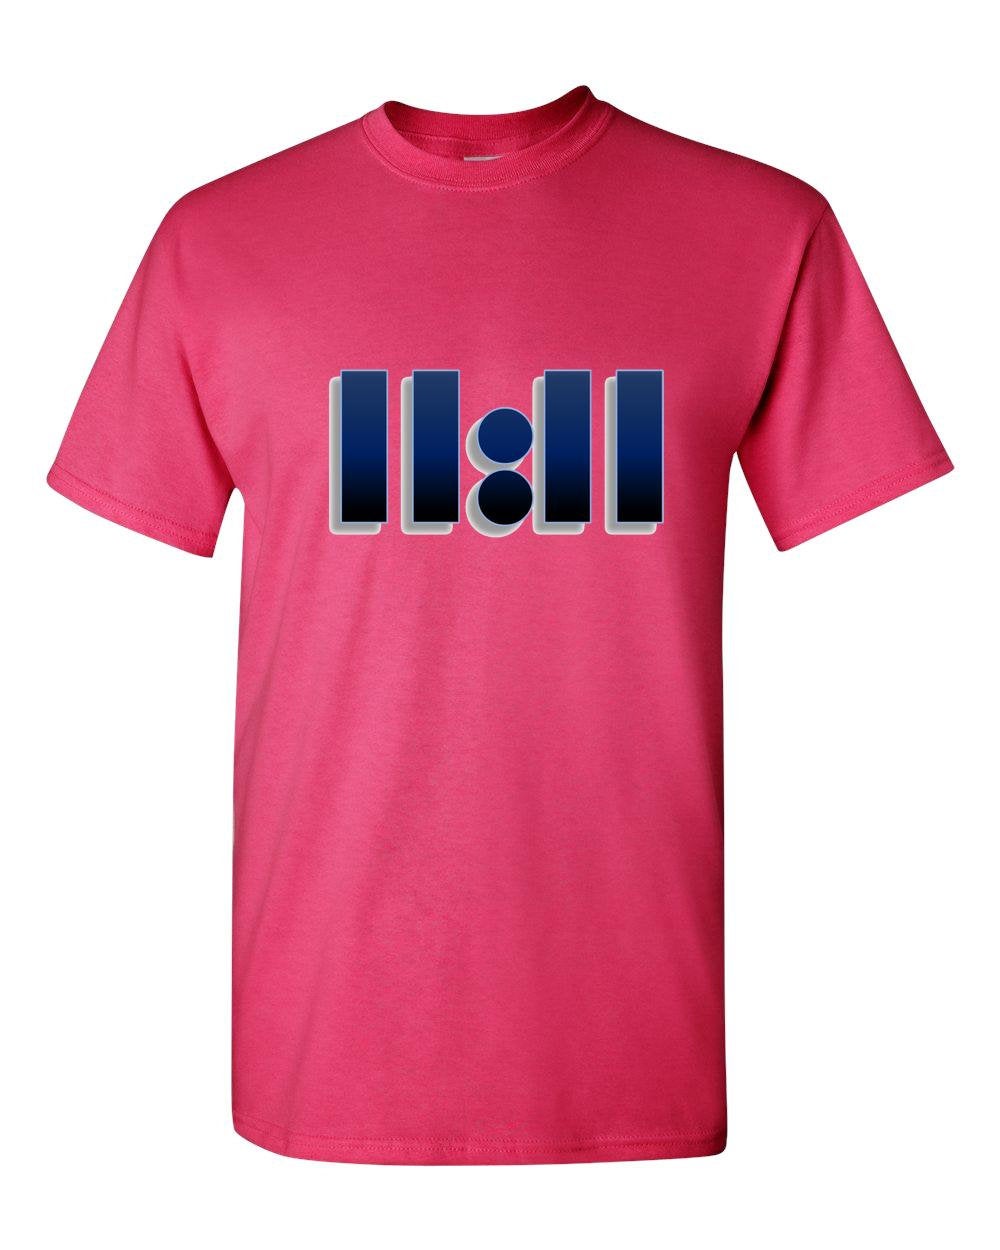 Numbers 11:11 - Adult Unisex T-Shirt  Law of Attraction Eleven Eleven